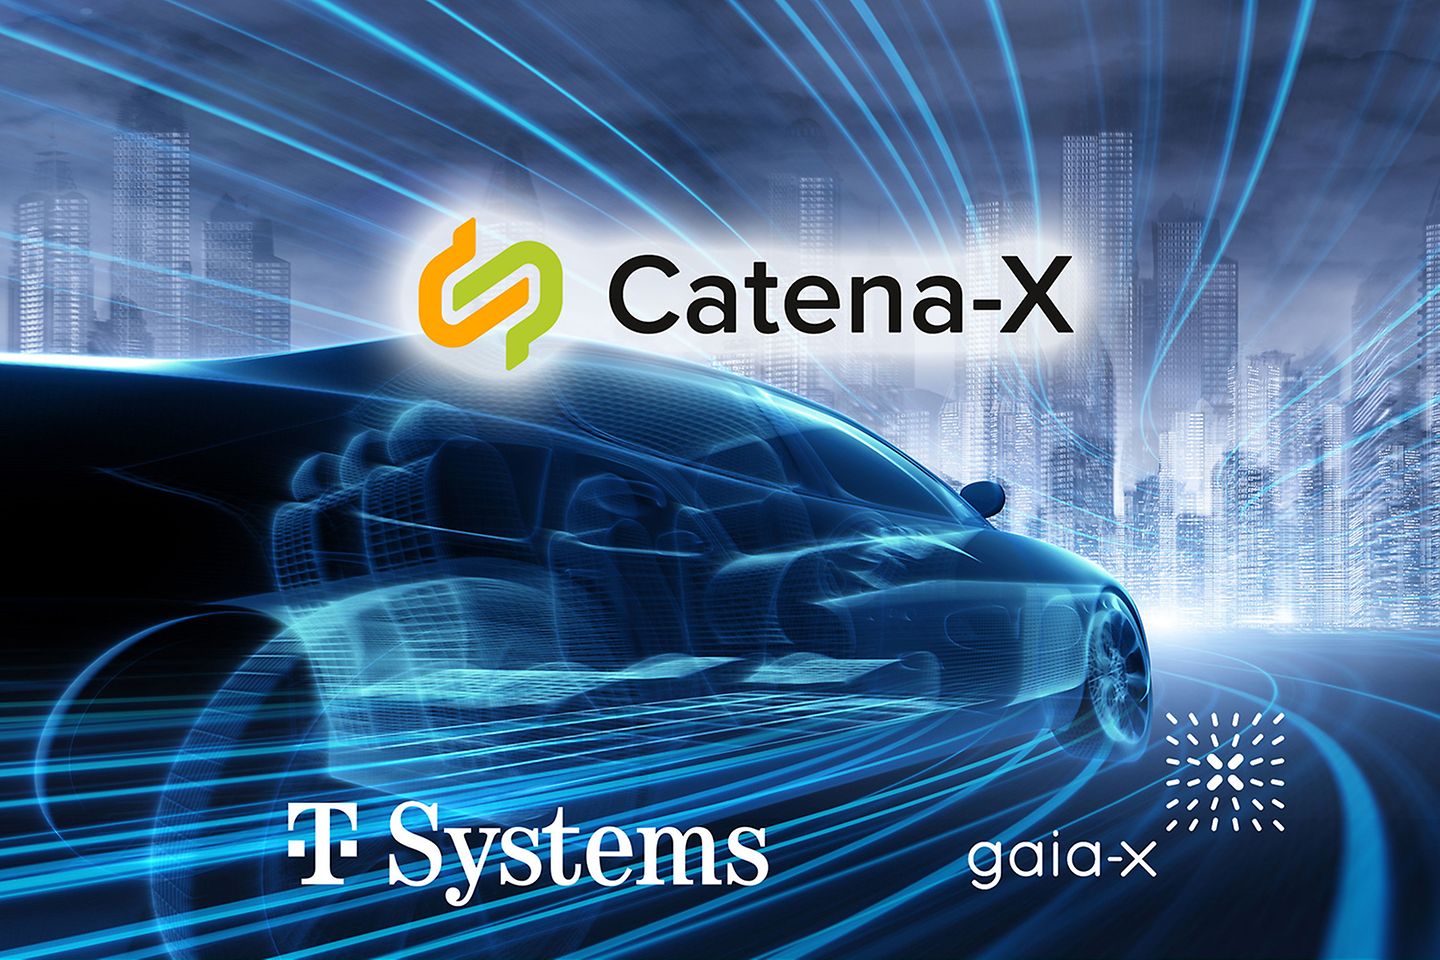 Generic modern car with T-Systems and Catena X logo